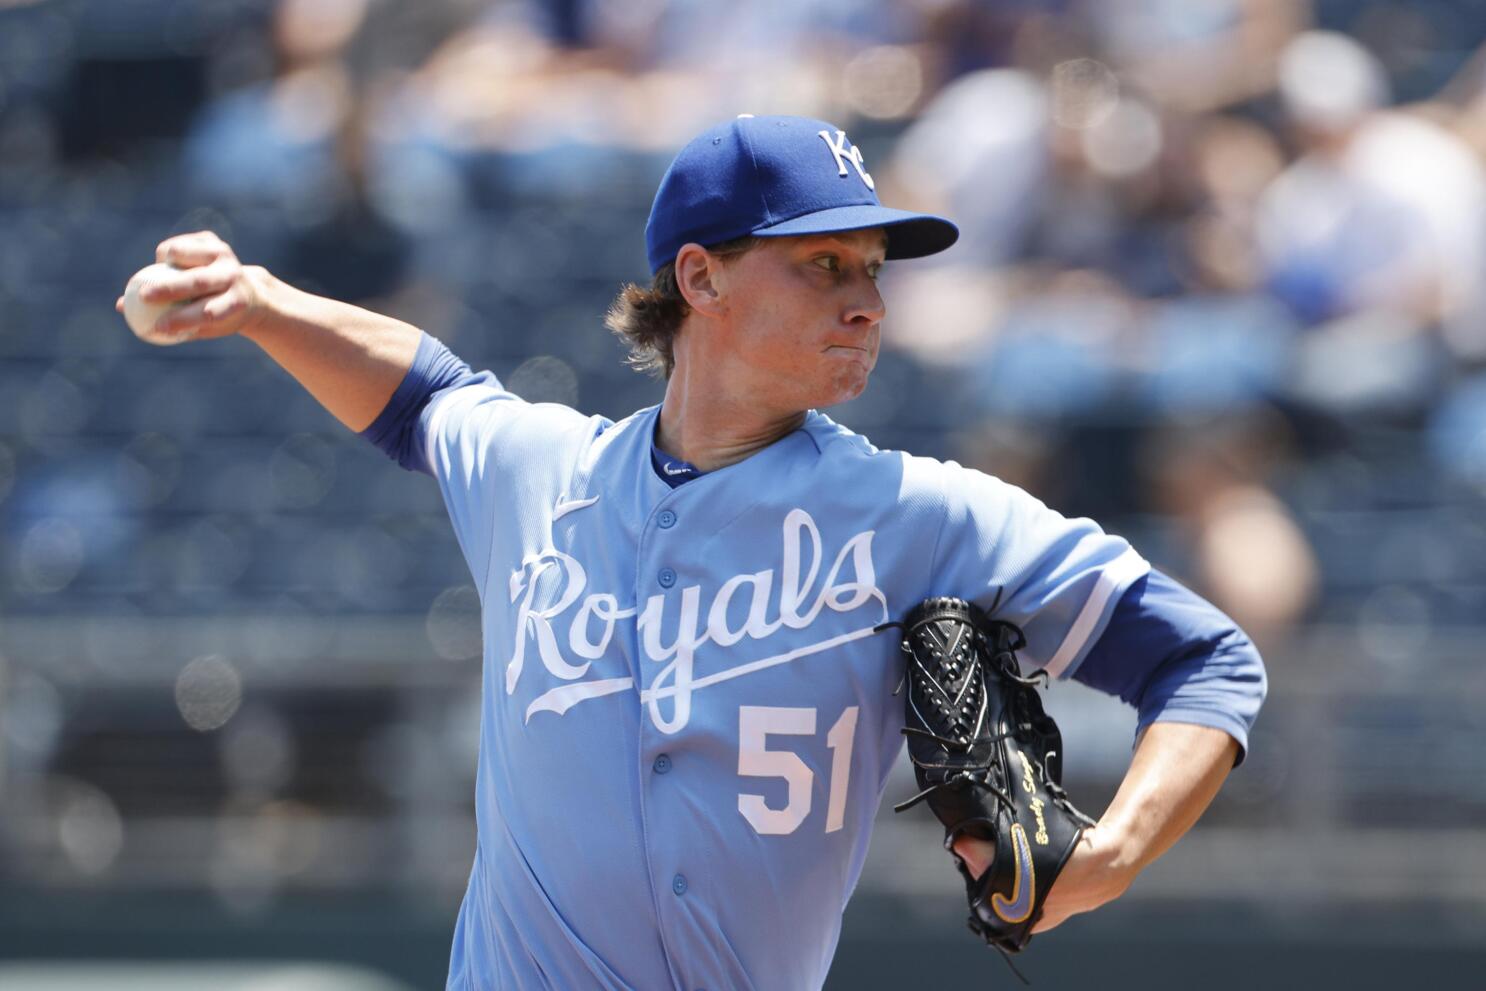 Singer pitches into sixth, Royals beat Rockies 2-0 to avoid sweep